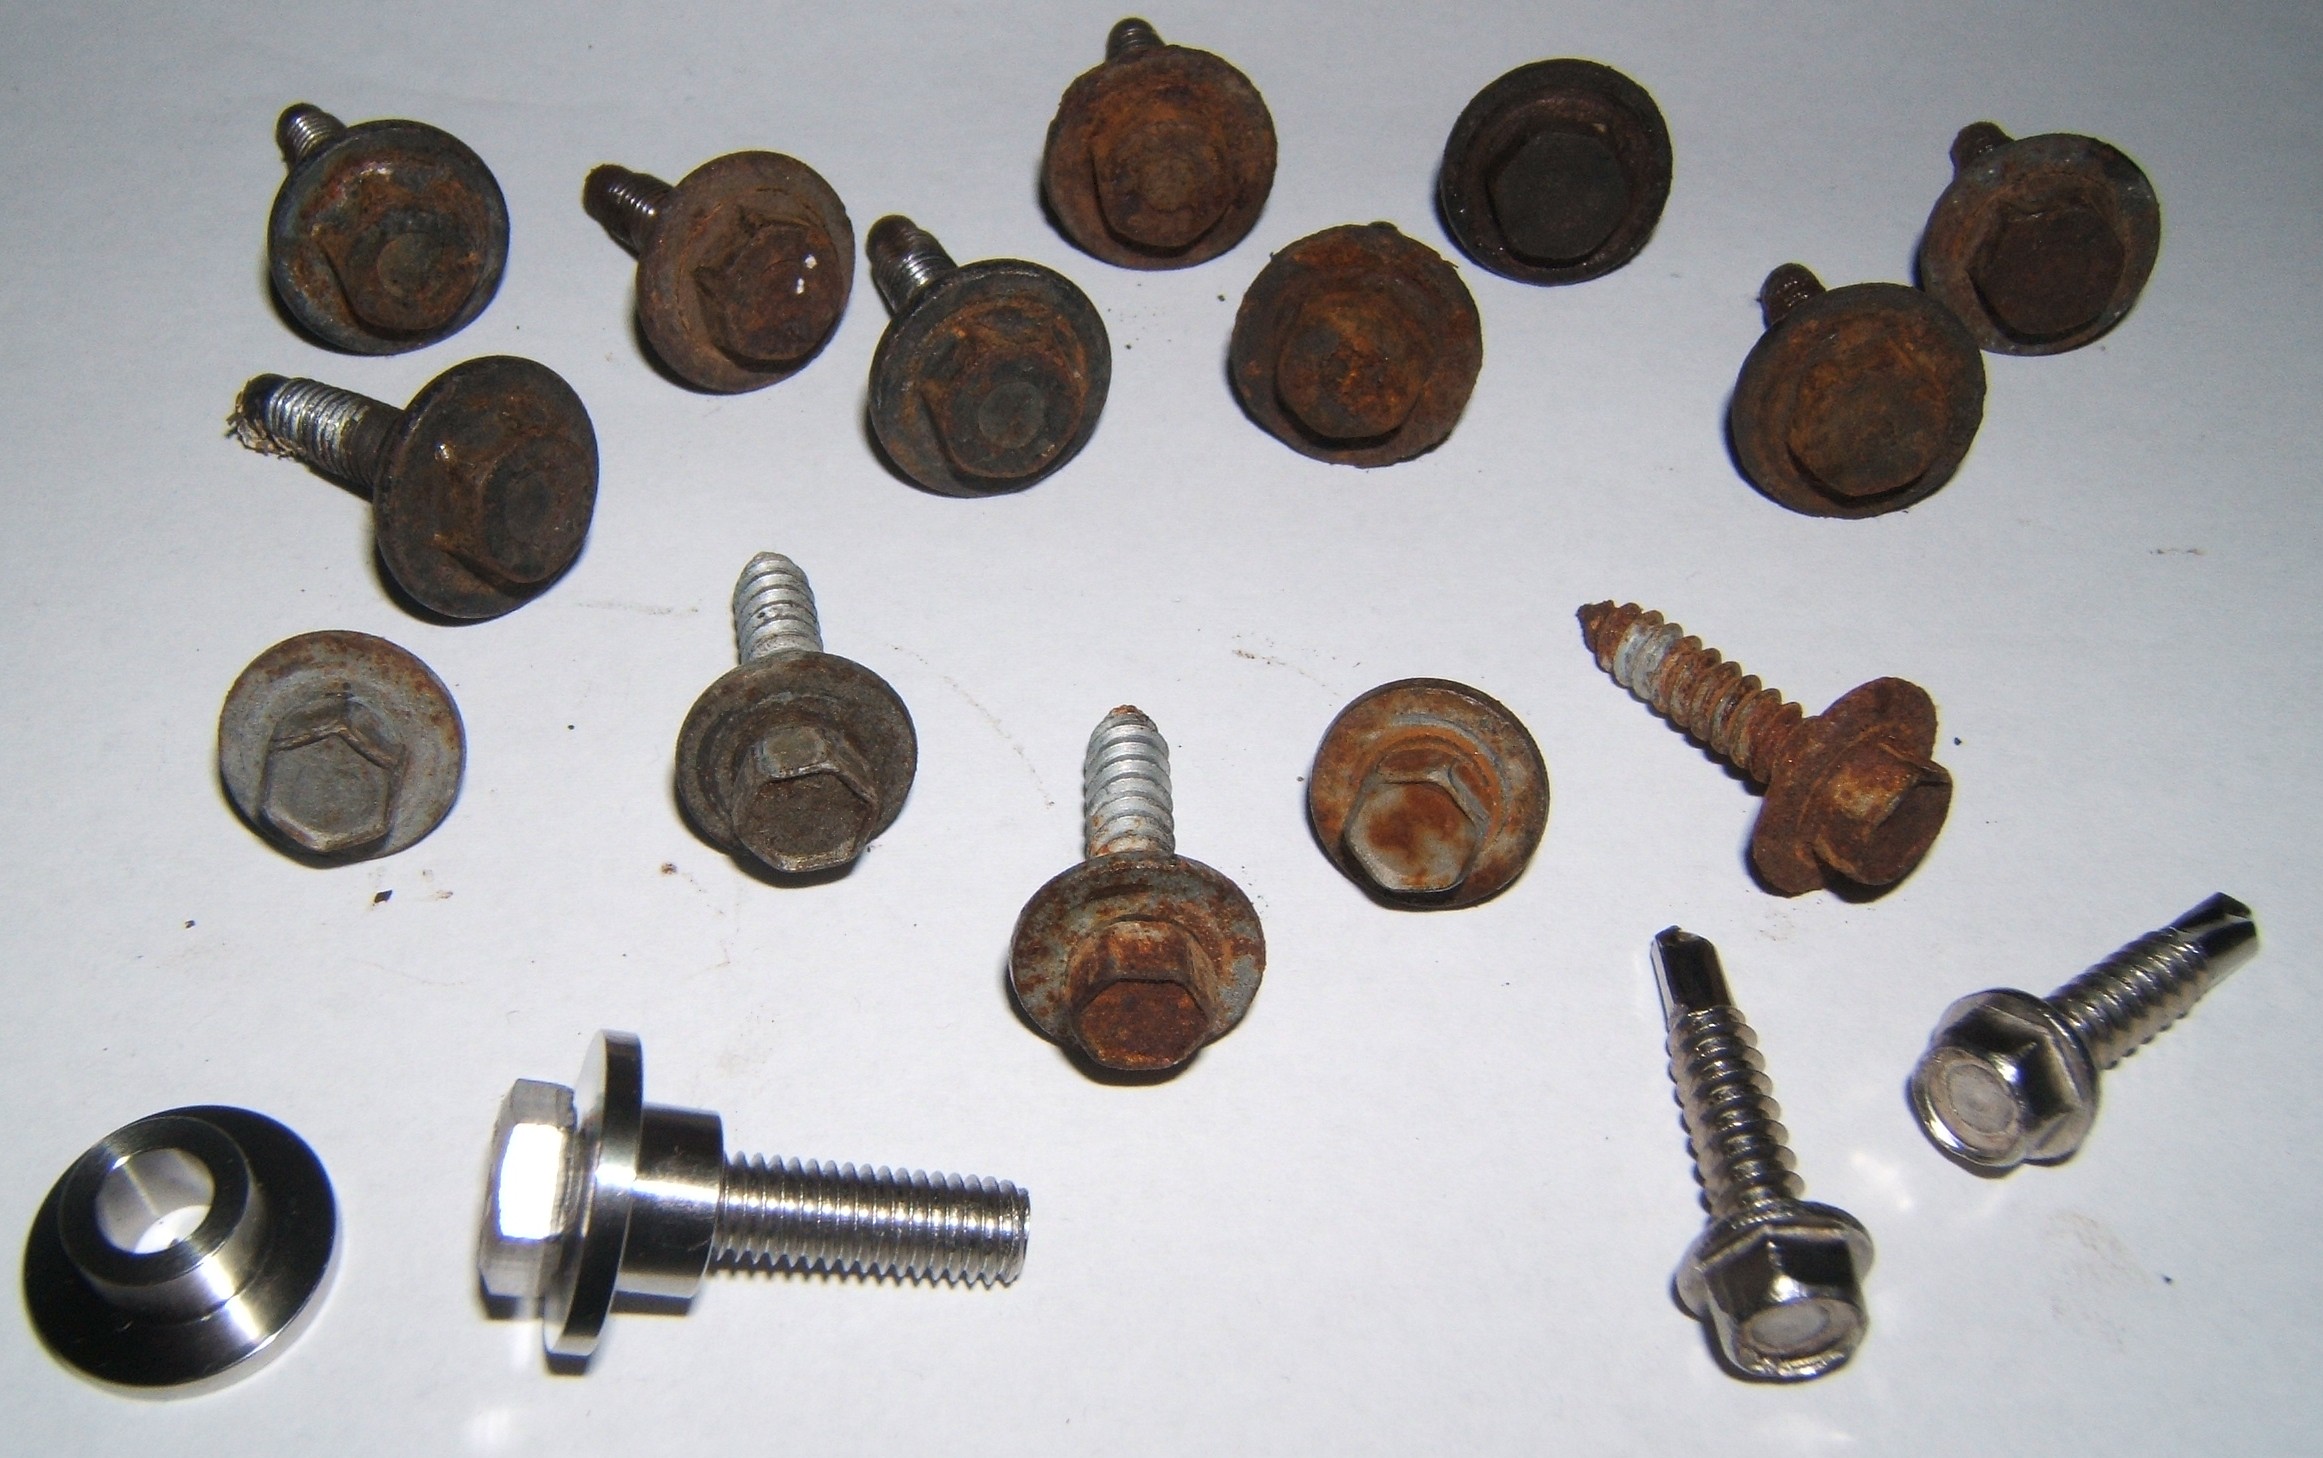 Fiat Bravo, stainless steel bolts